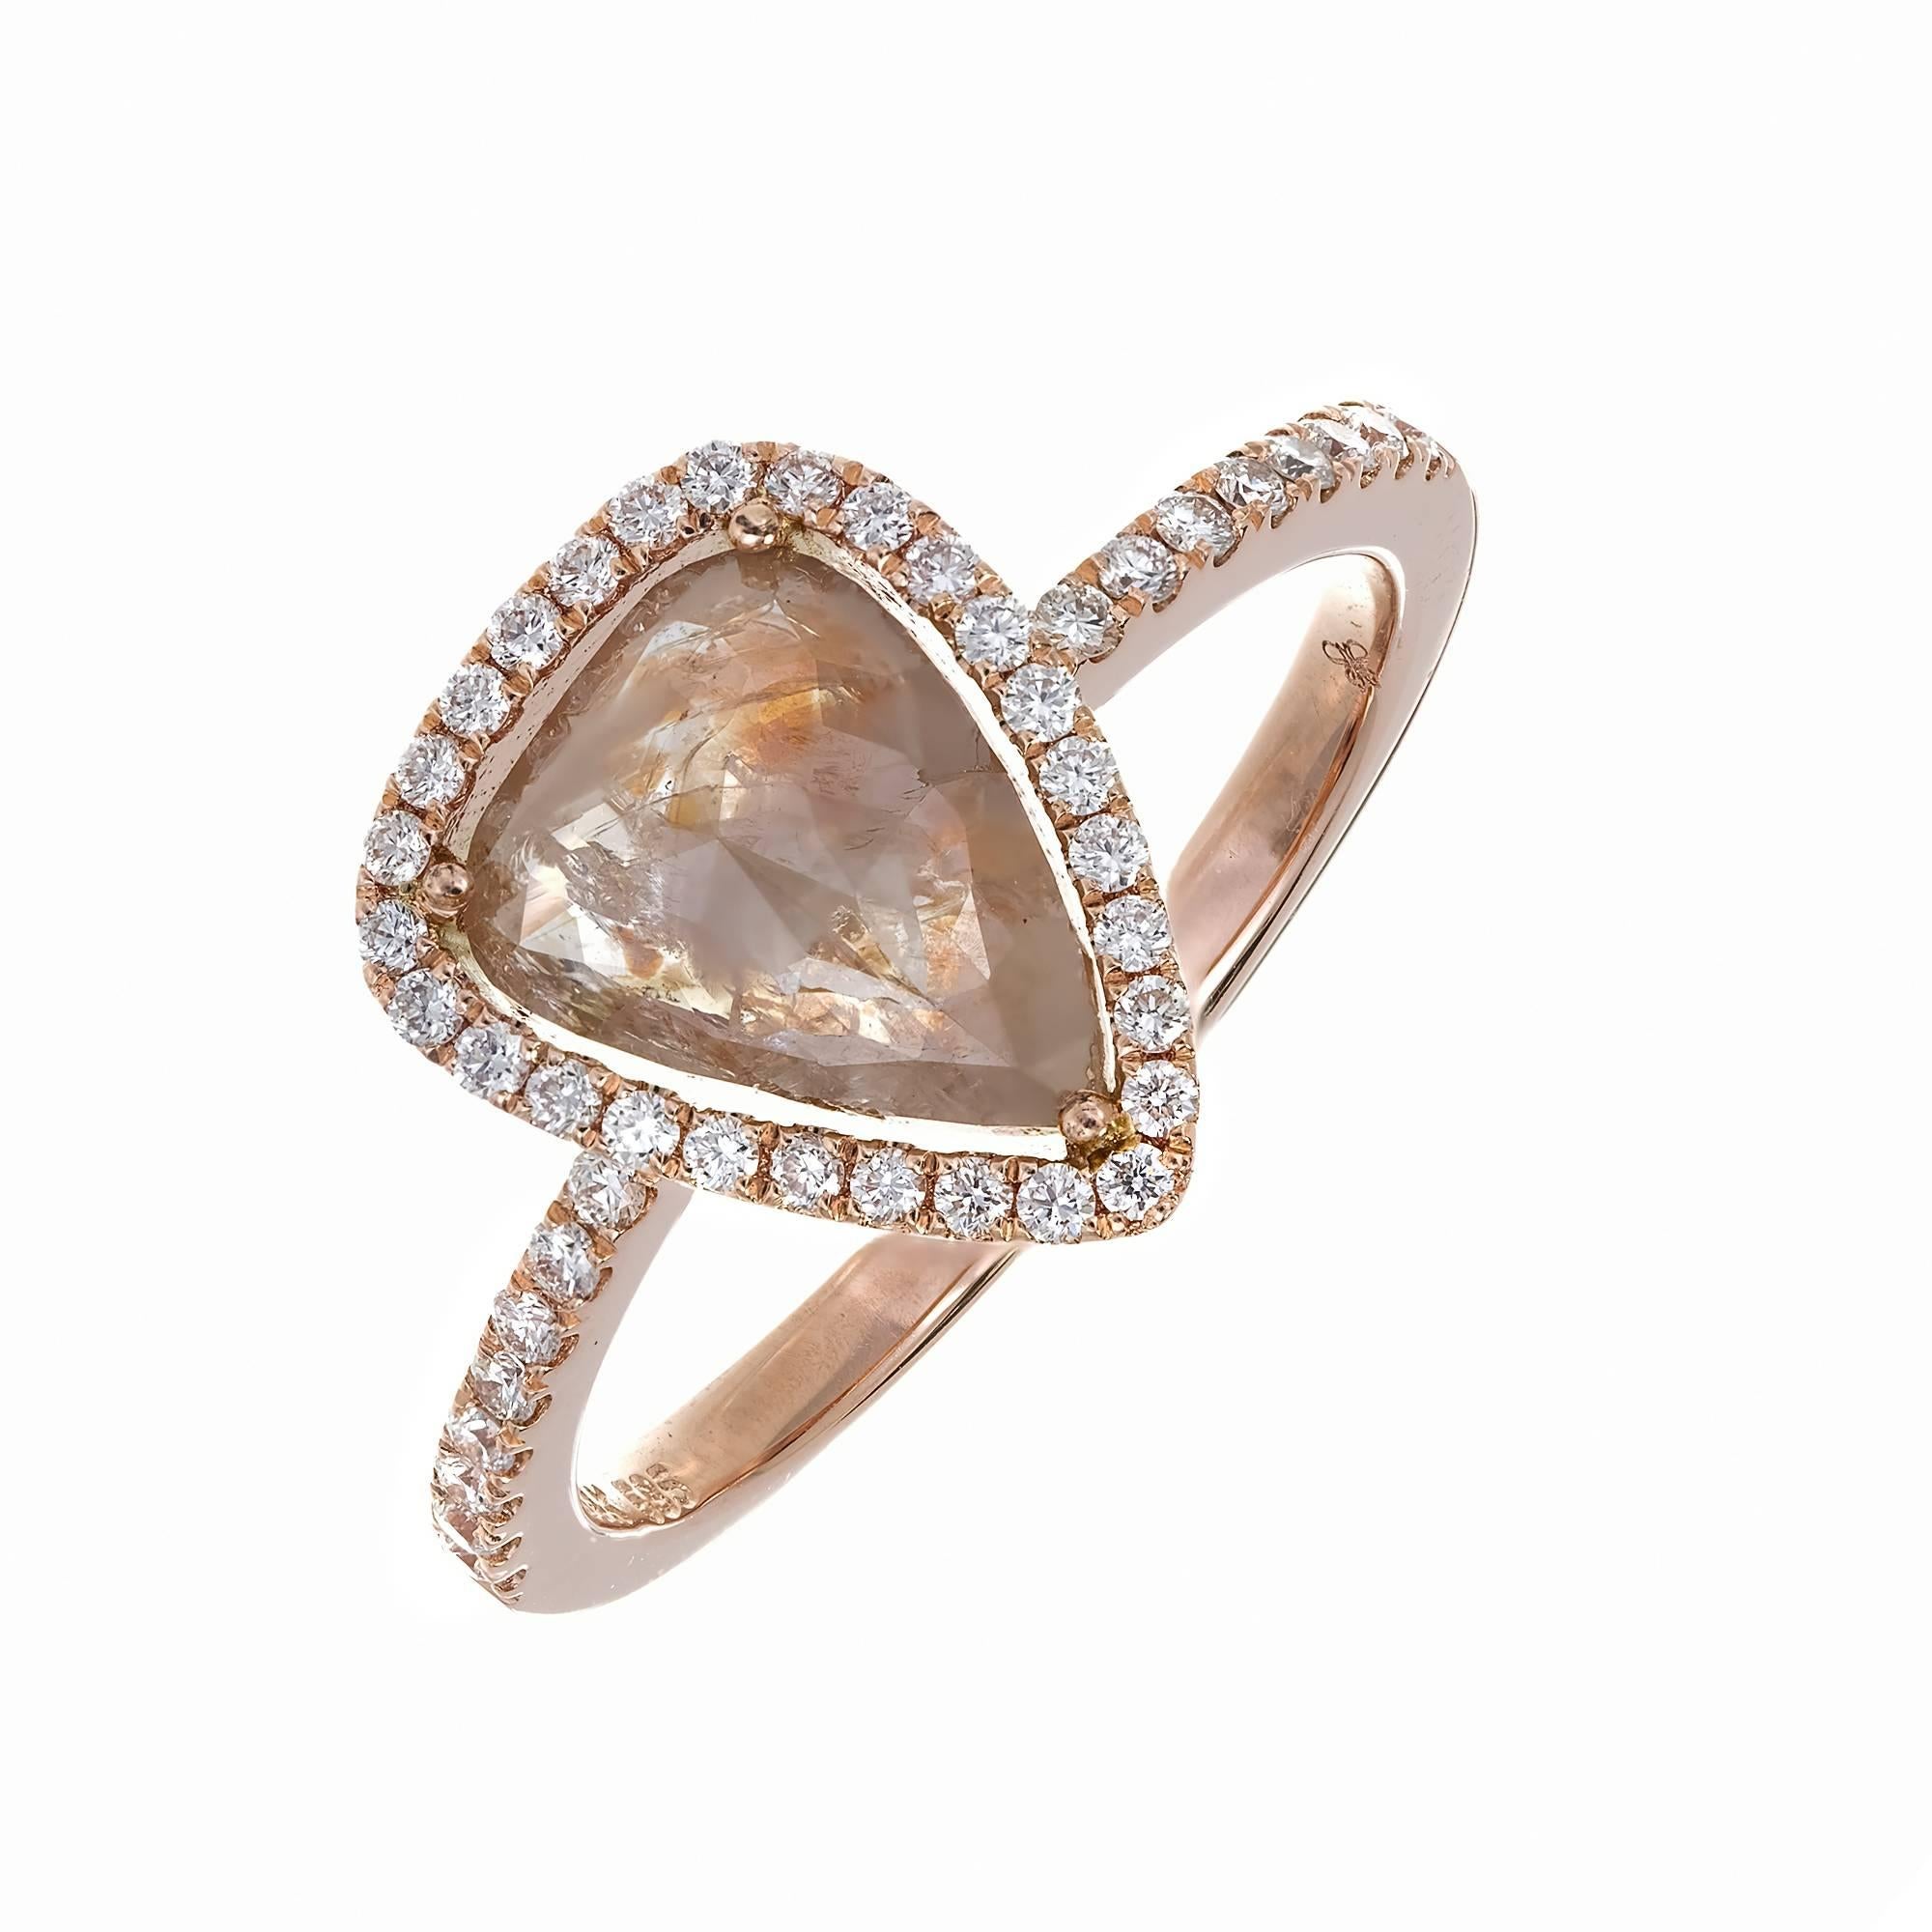 1.34 Carat Pear Diamond Rose Gold Engagement Ring. Fancy color diamond   surrounded by bright white diamonds in a 14k rose gold setting. True natural multi-color diamond yellow, pink and brown.

1 pear rose cut natural multi-color diamond, approx.